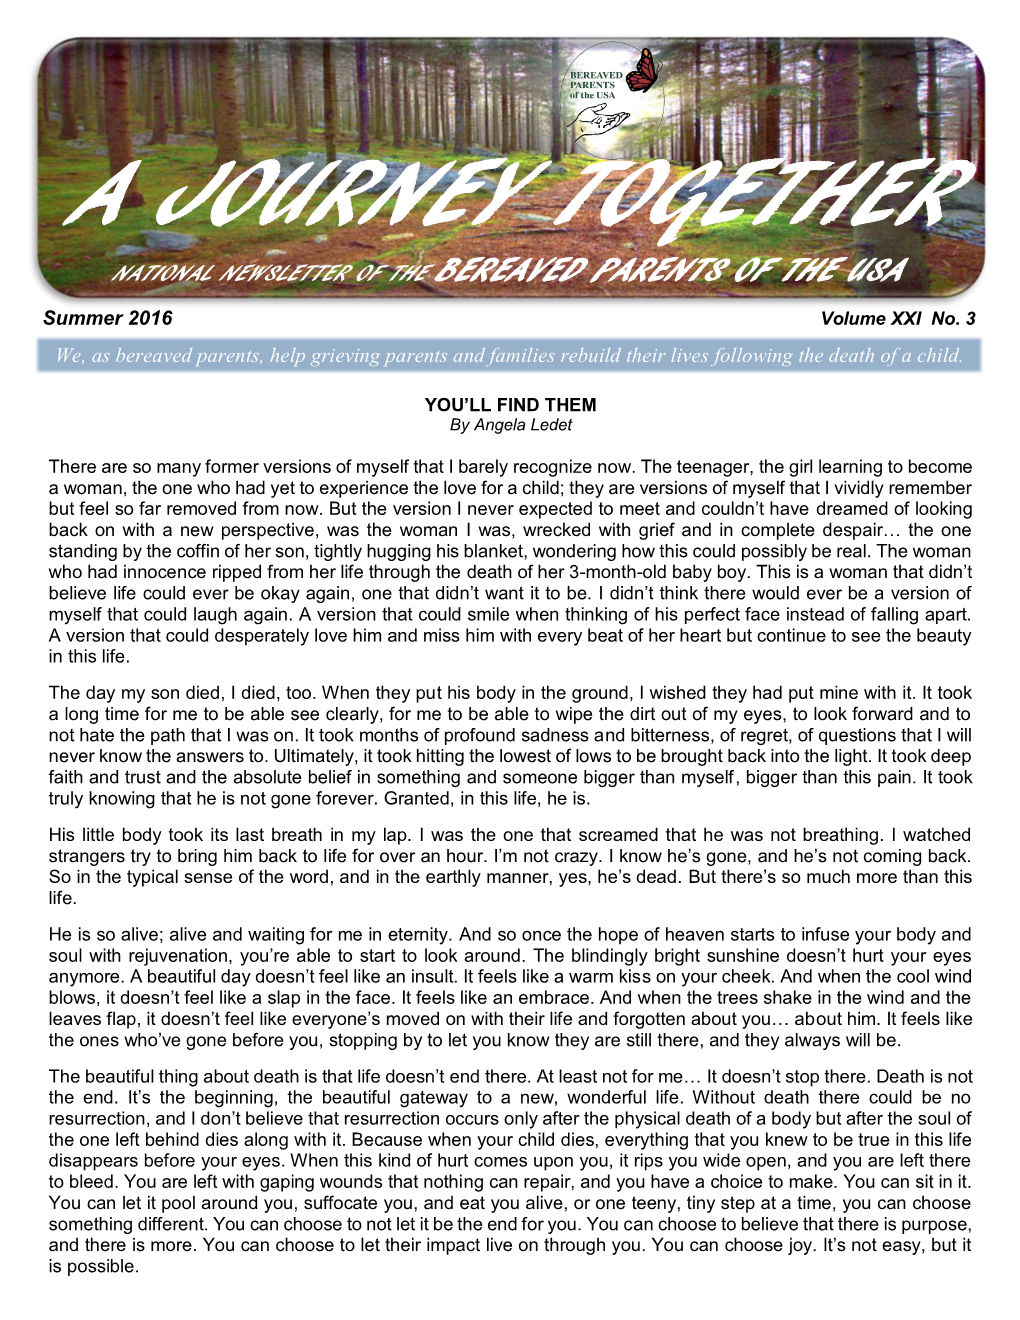 A Journey Together National Newsletter of the Bereaved Parents of the Usa